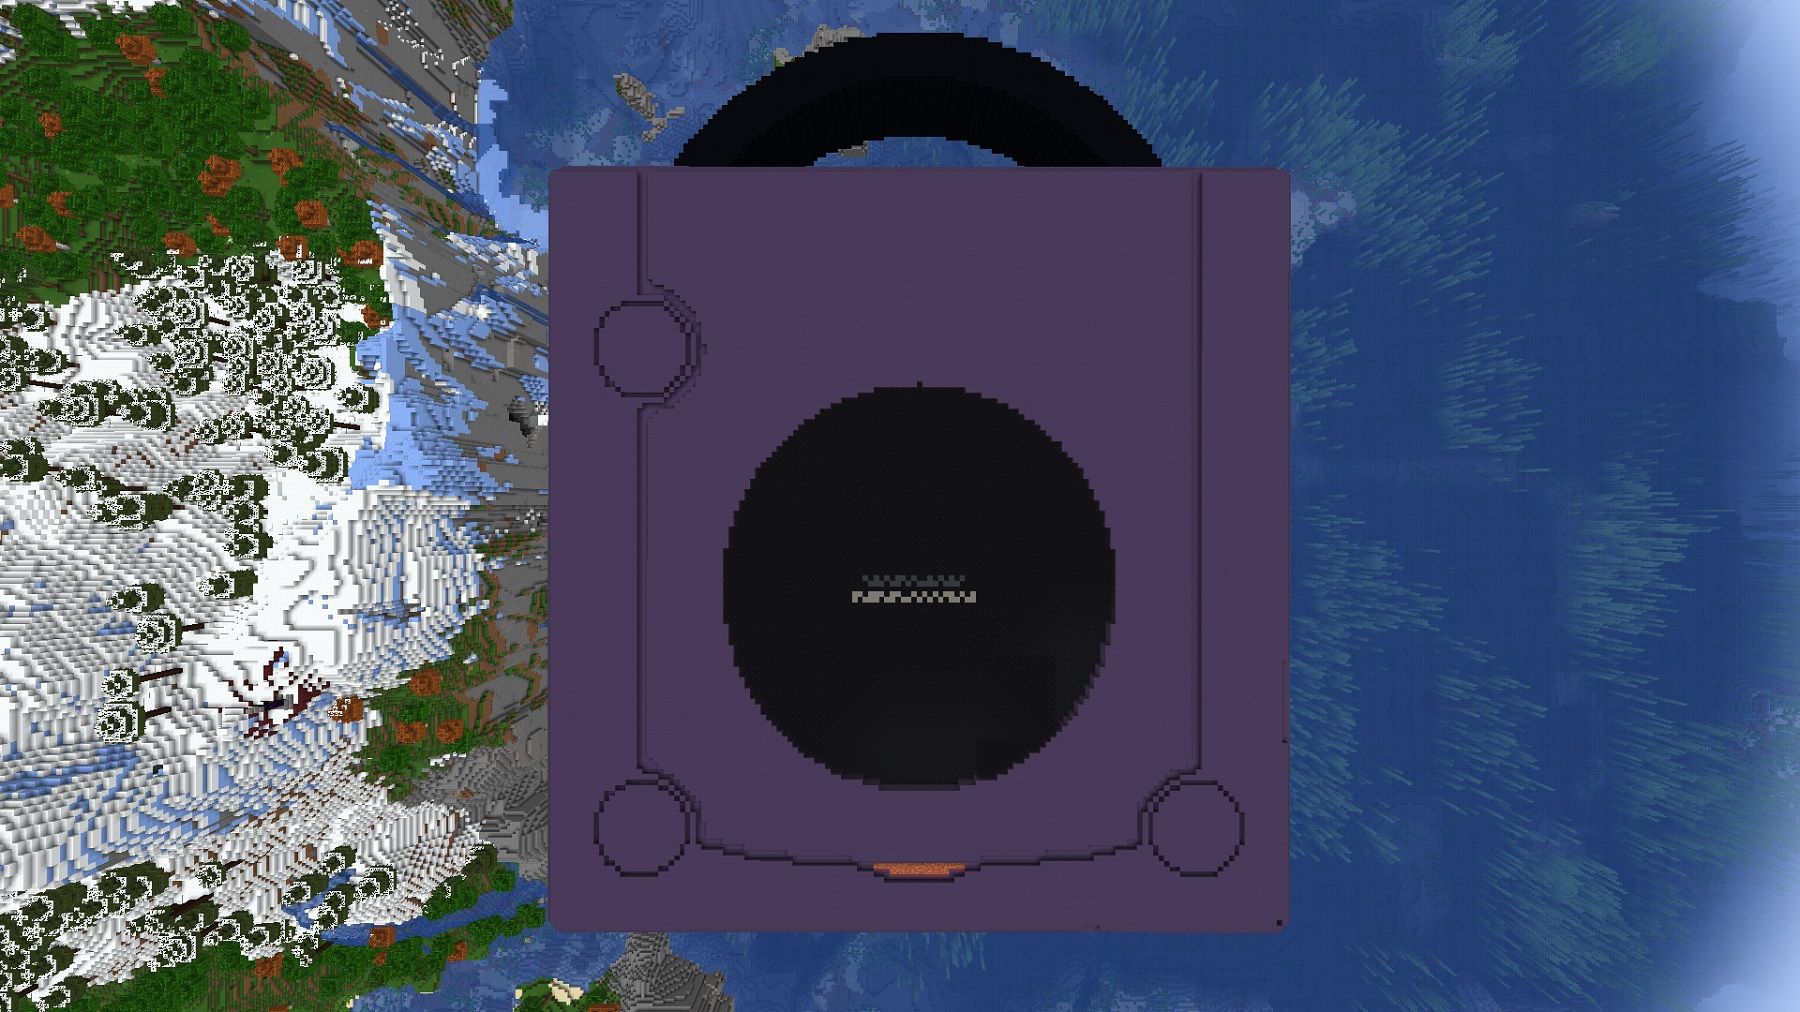 Screenshot from Minecraft showing a giant Nintendo GameCube from above.